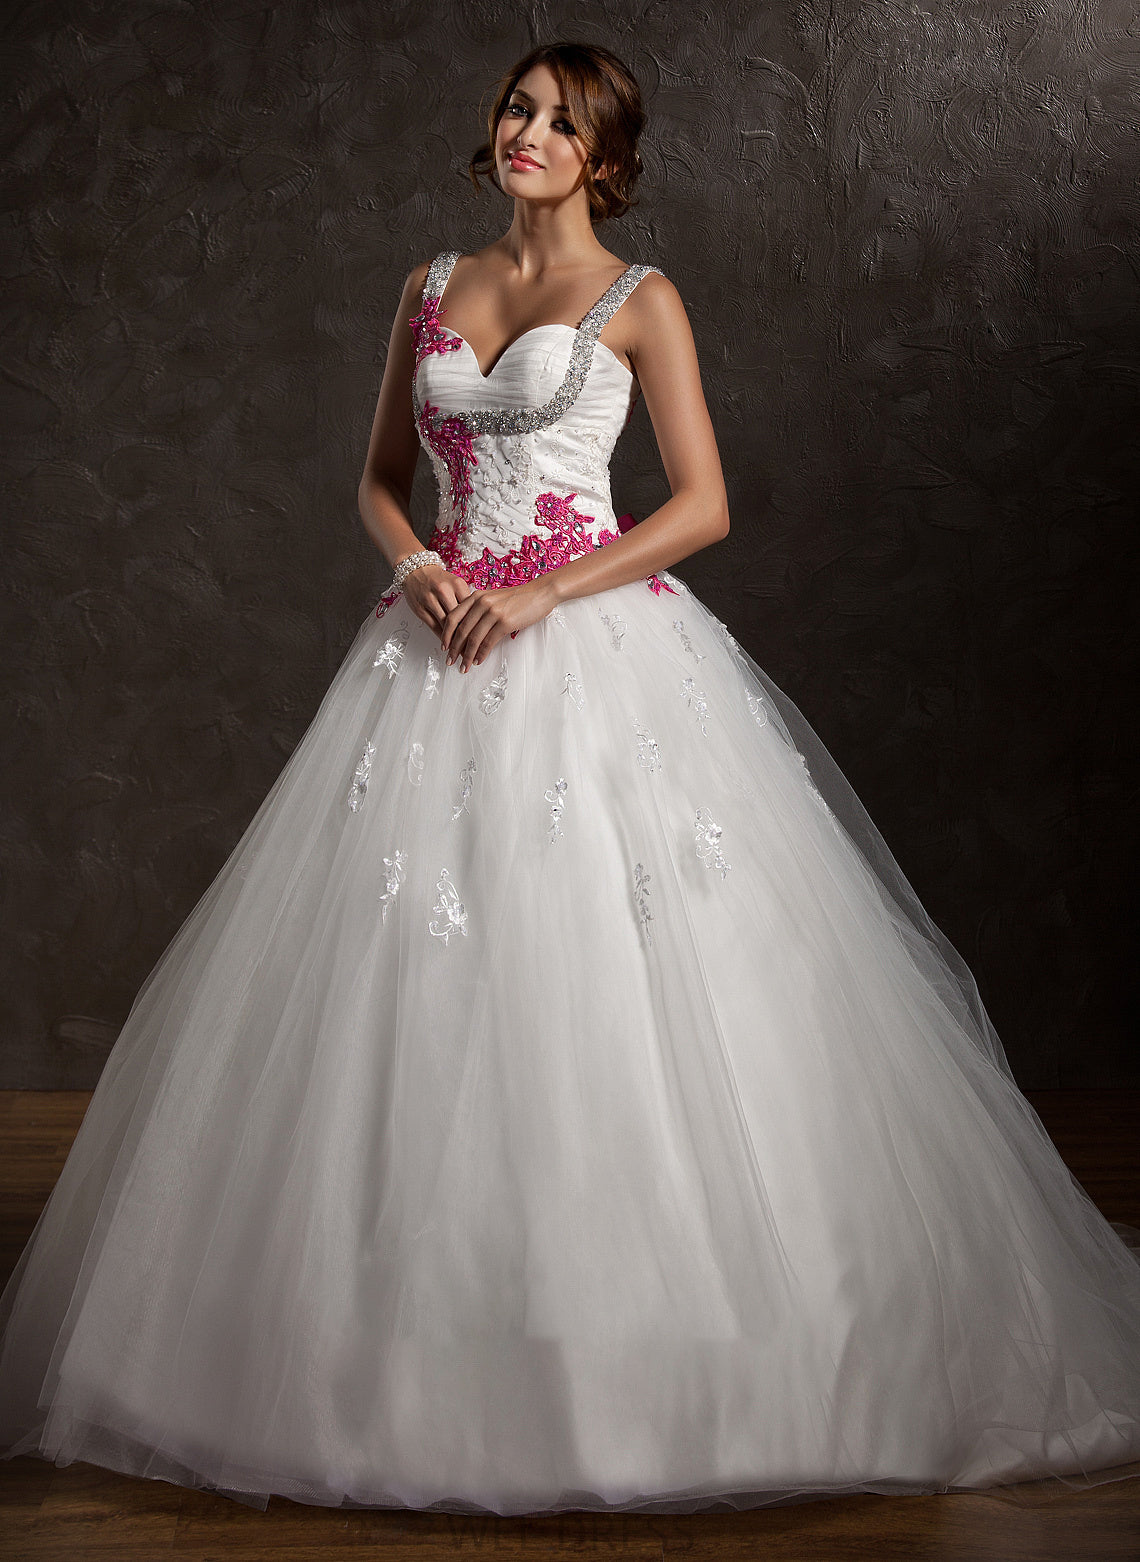 Lace Ruffle Chapel Ball-Gown/Princess Wedding Dresses Dress Sweetheart Wedding Train Appliques Tulle With Bow(s) Kaia